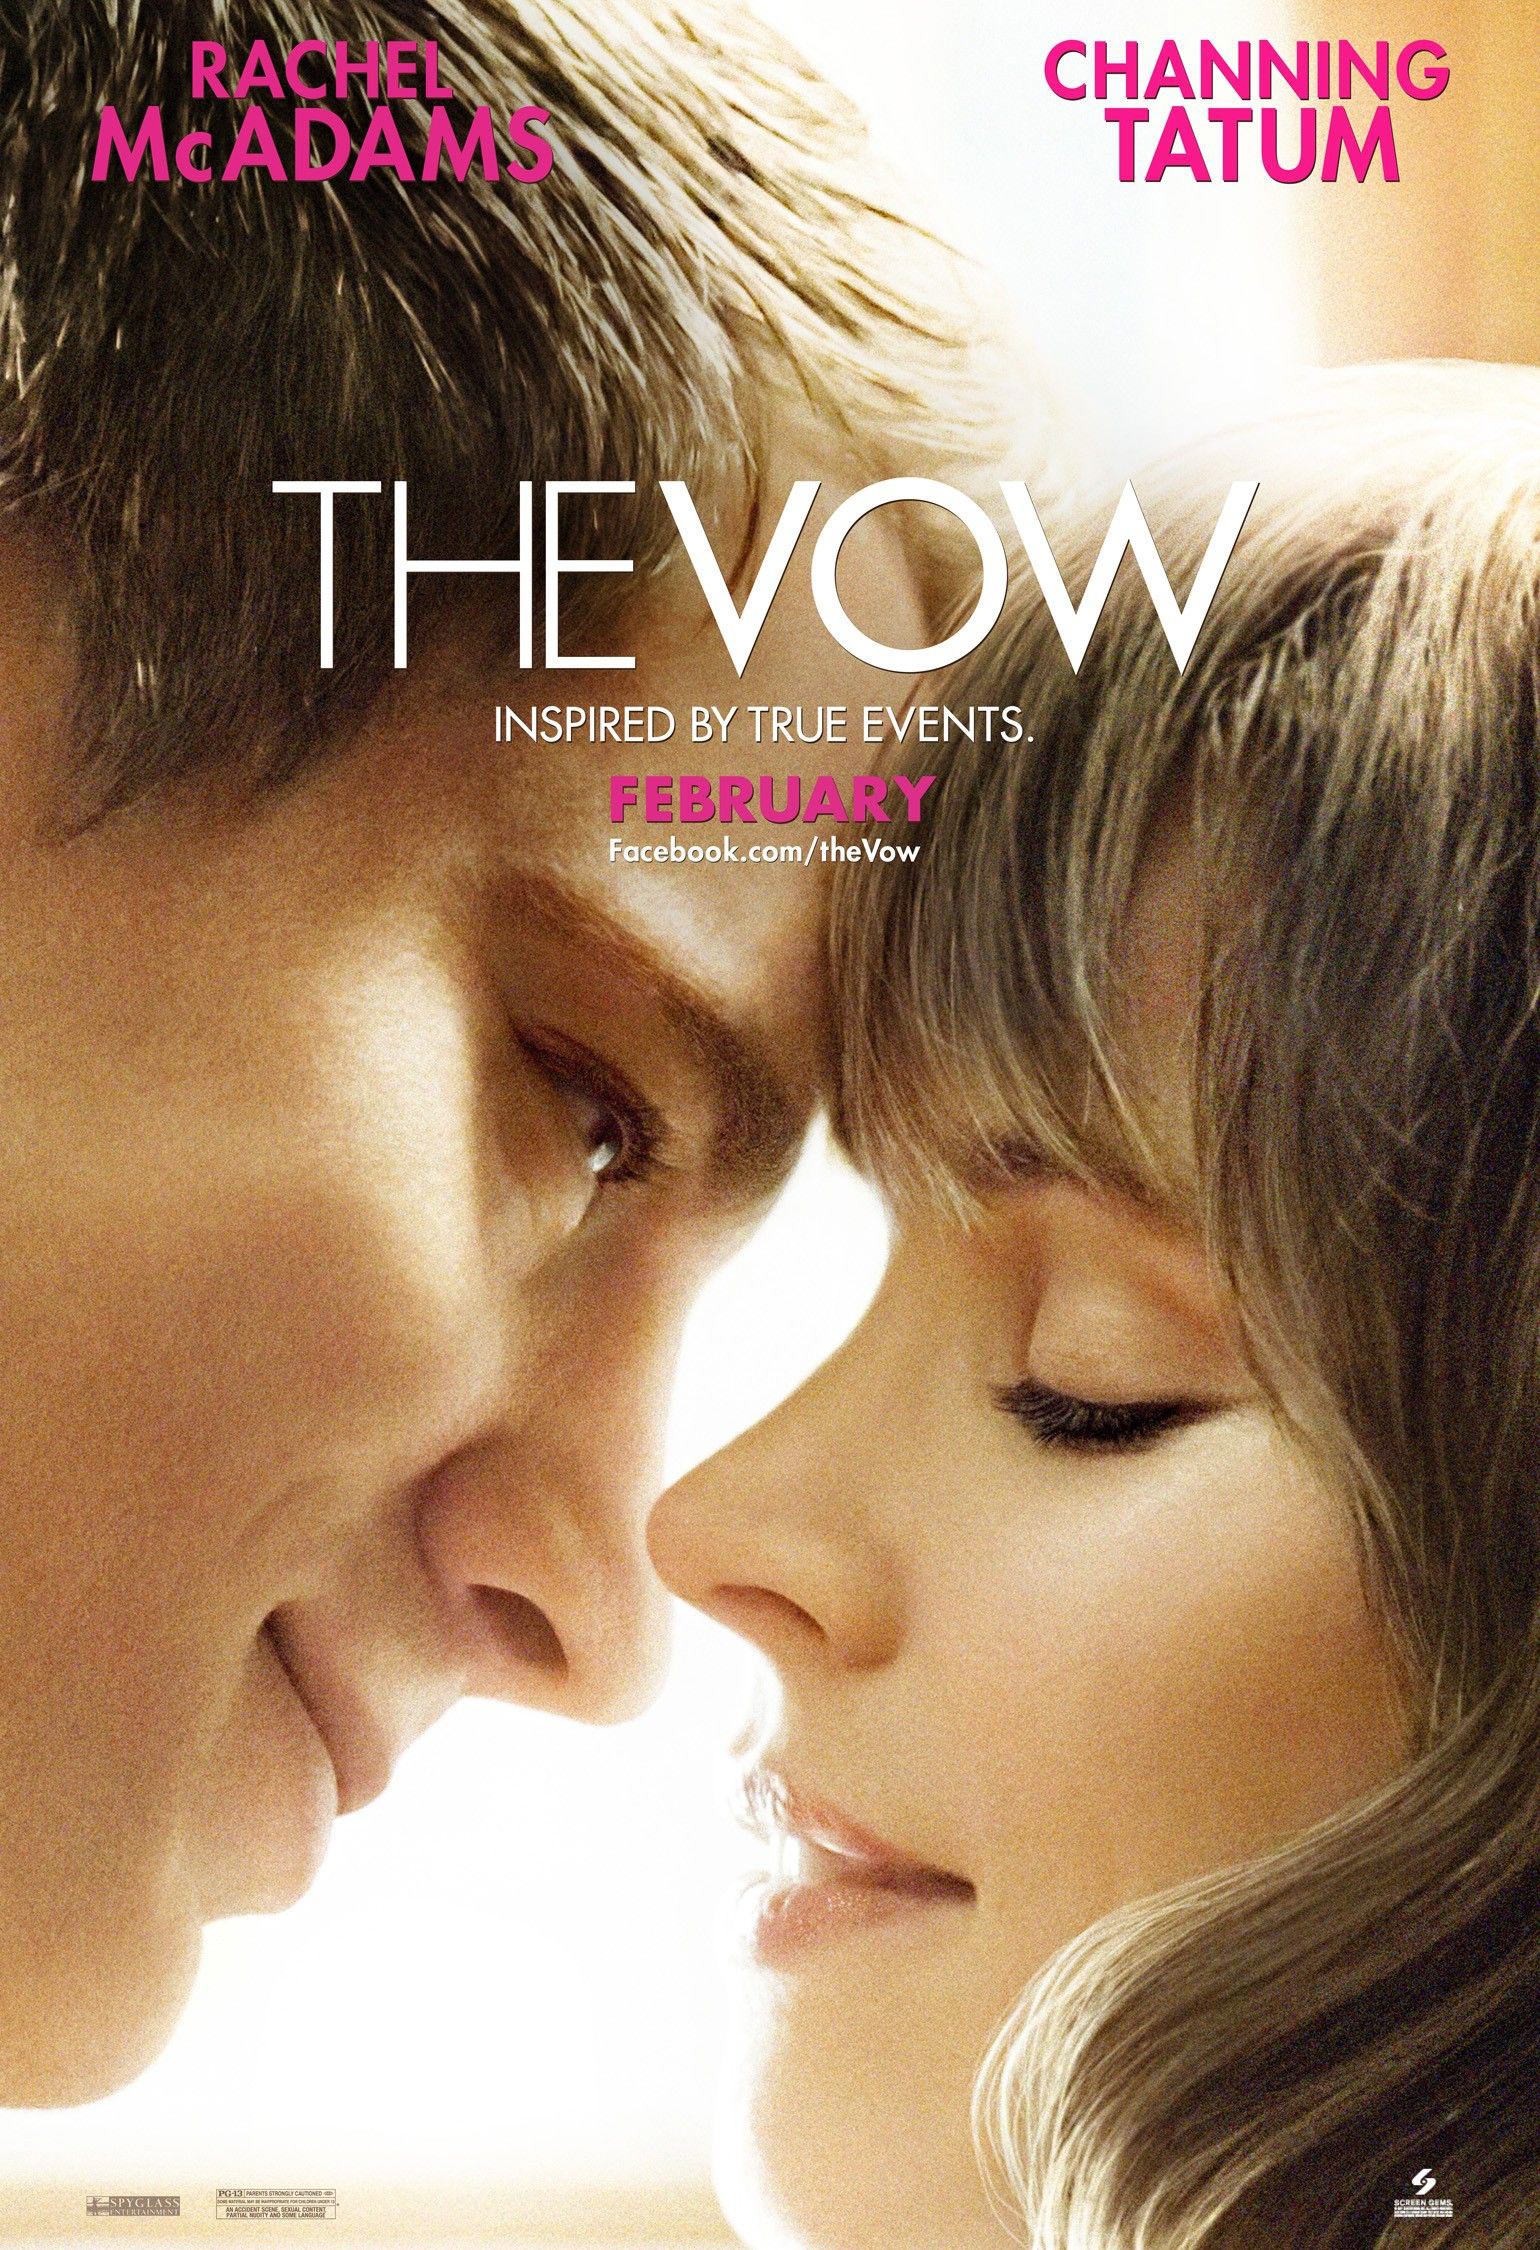 TheVow, The Vow Channing Tatum, ASU Valentines Day